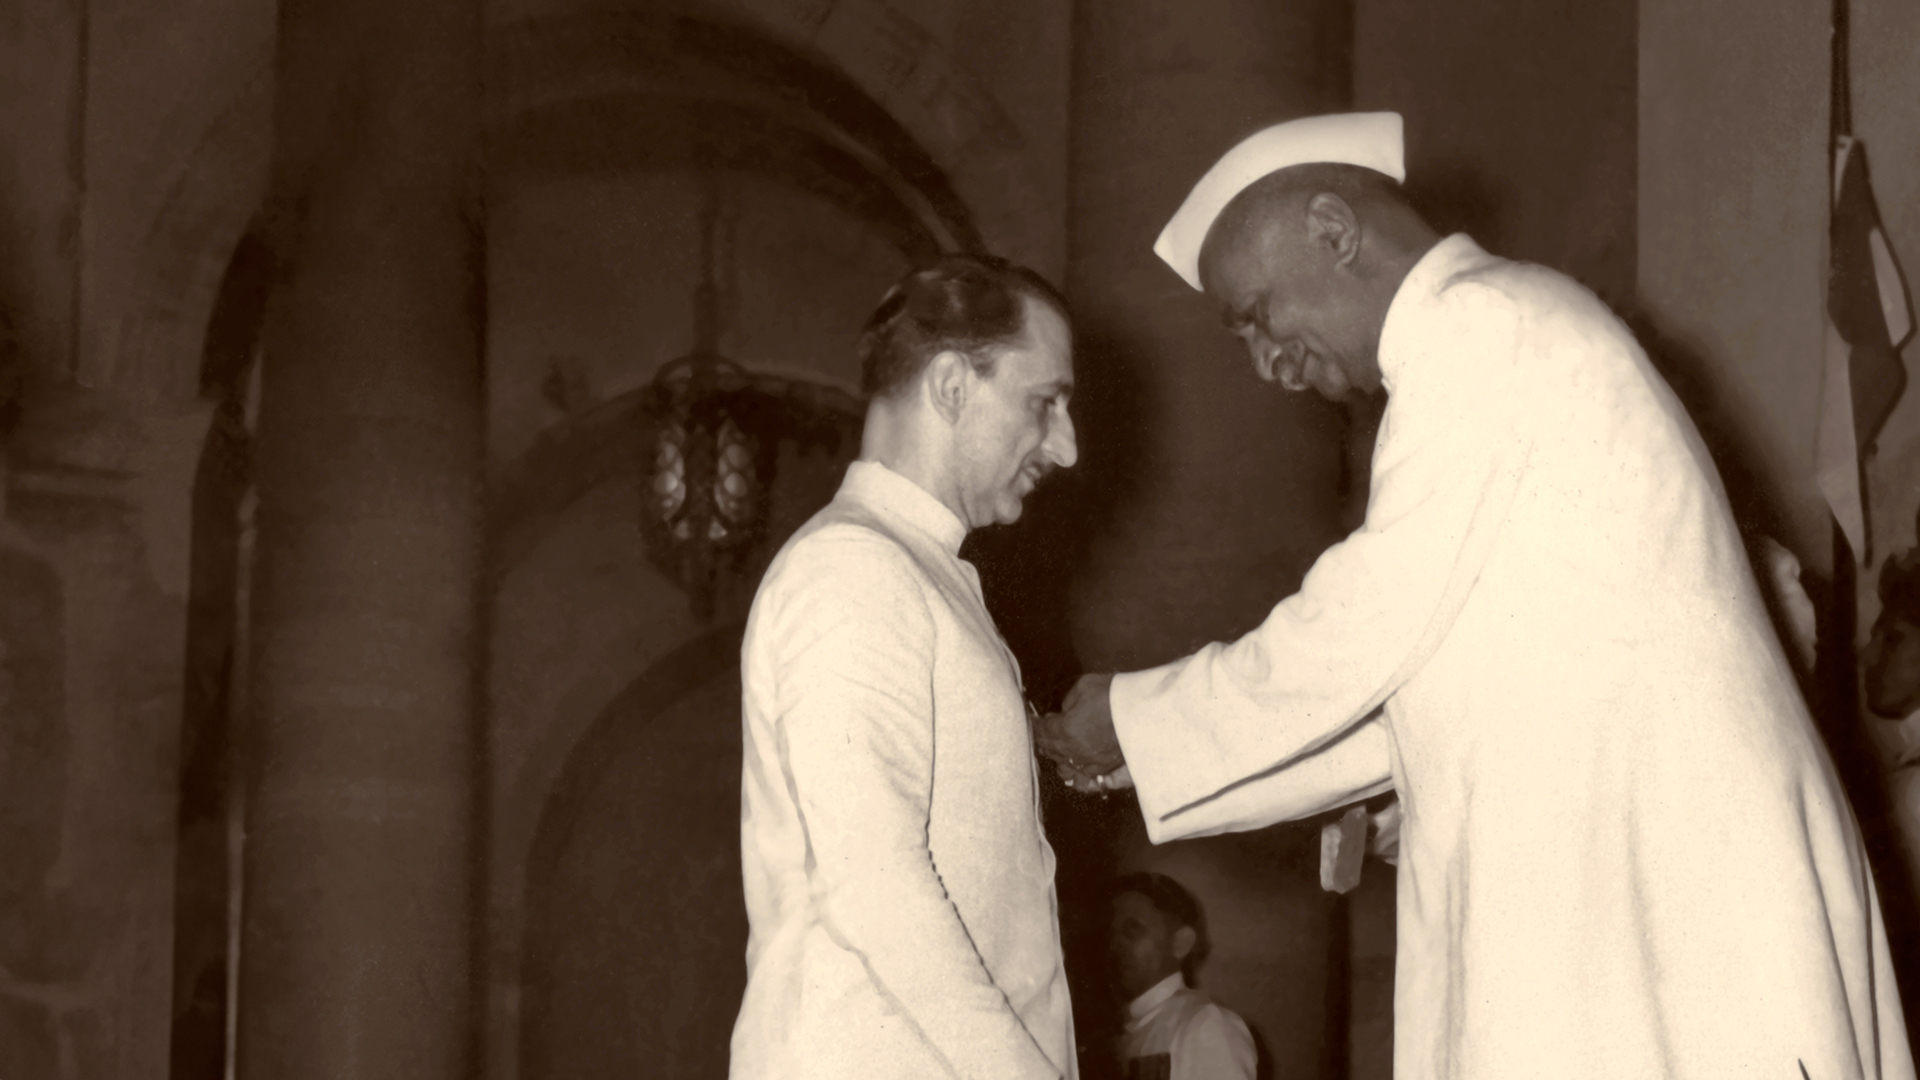 Receiving the Padma Vibhushan from Dr Rajendra Prasad, President of India